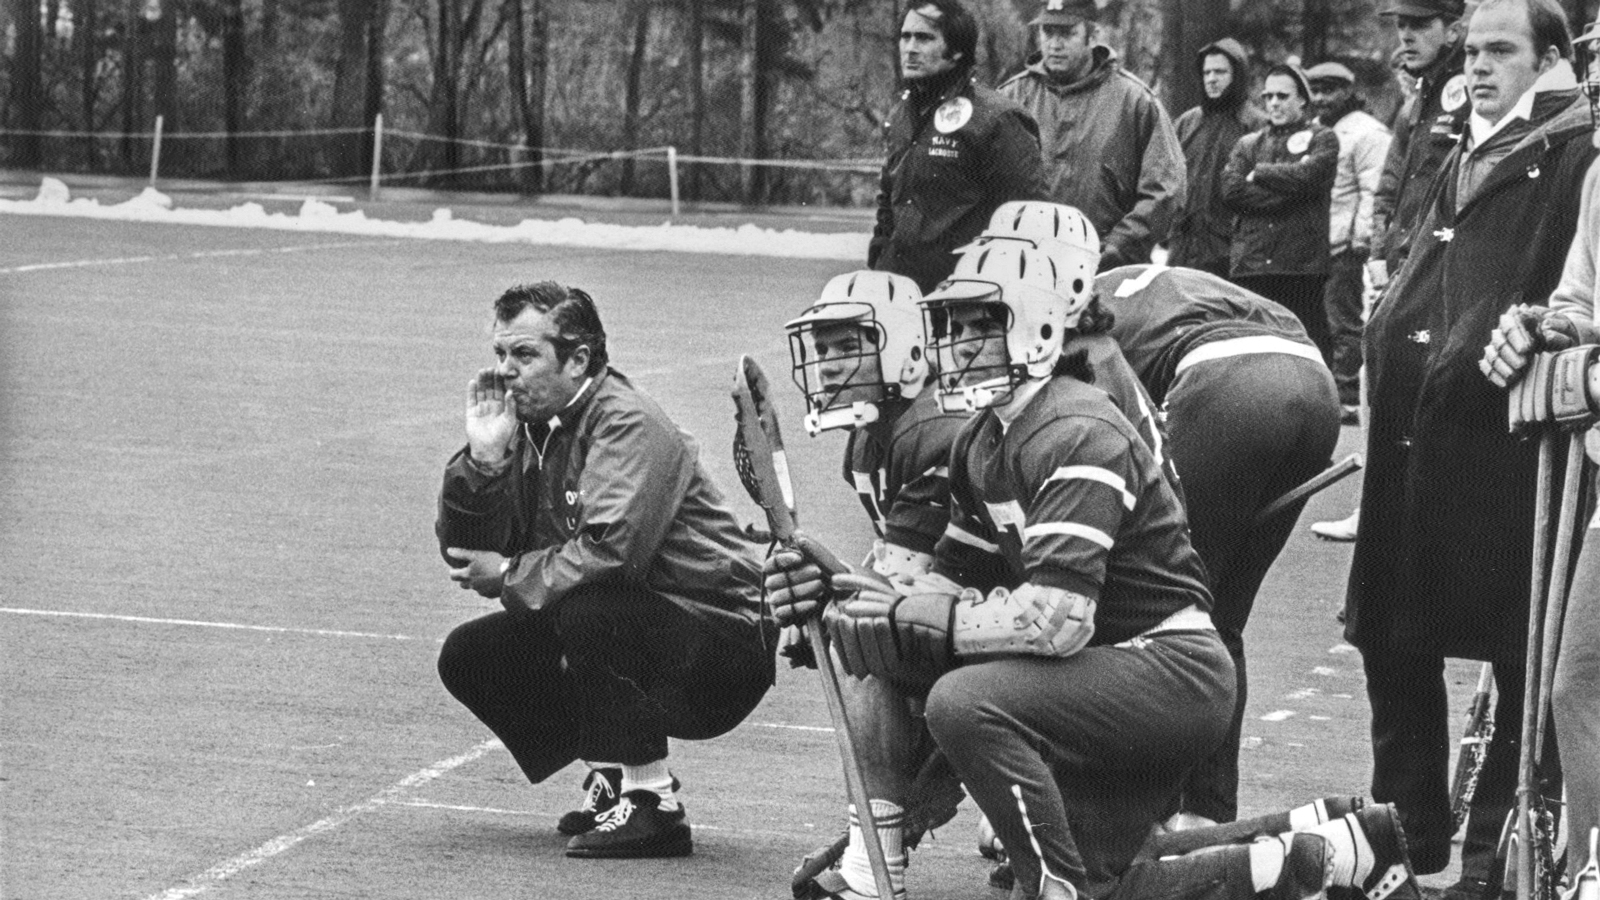 Longtime Cornell lacrosse coach Richie Moran is pictured during a game